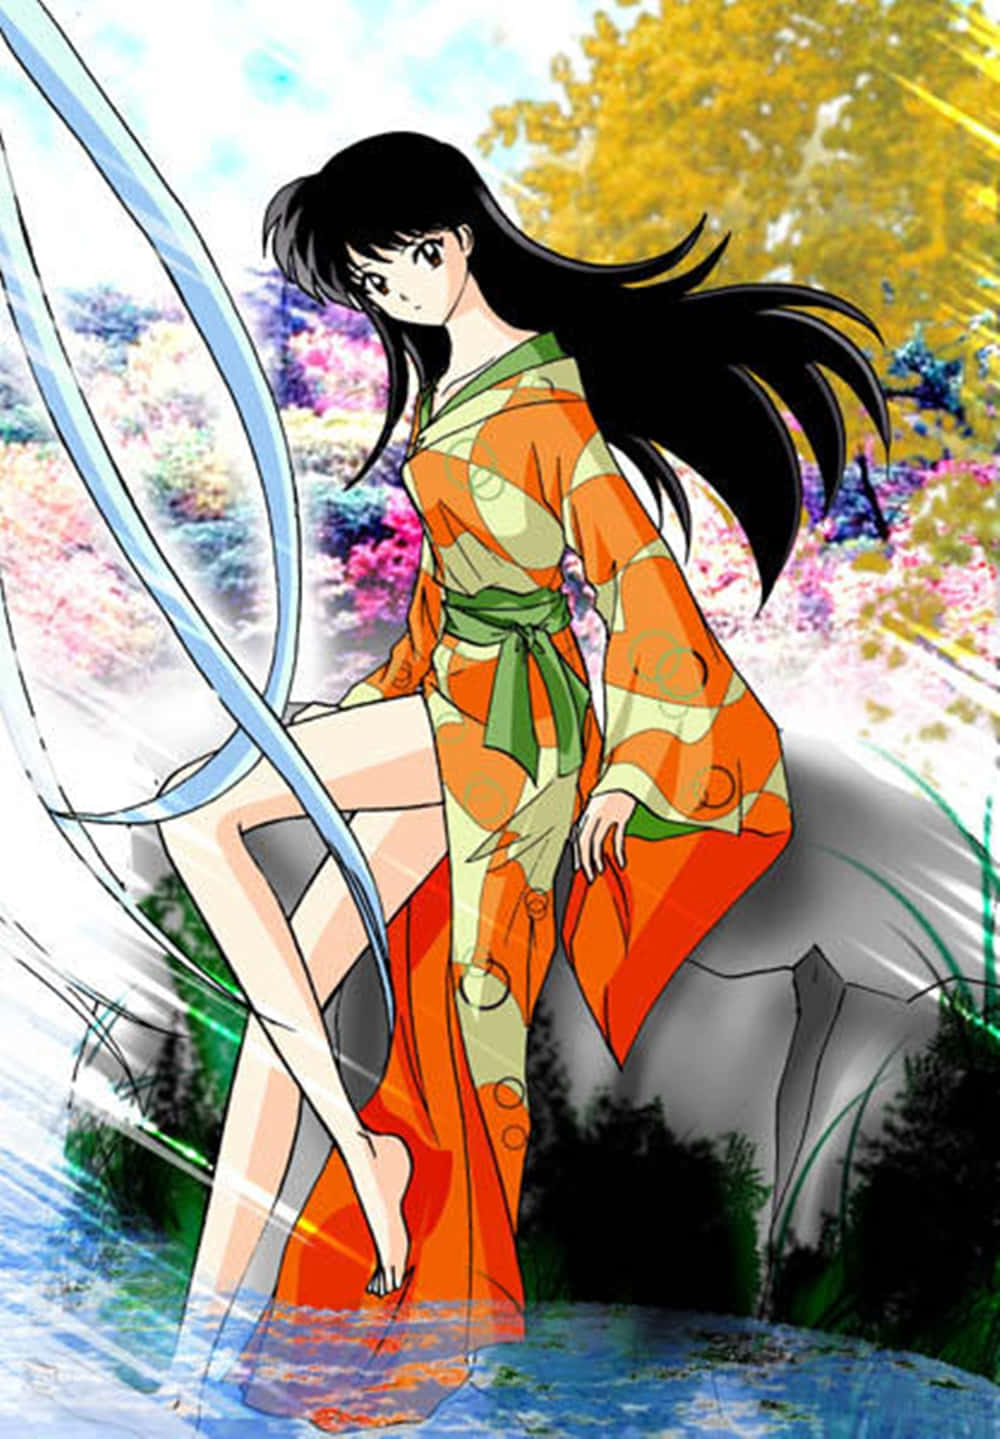 Inuyasha Rin Smiling in a Peaceful Forest Moment Wallpaper